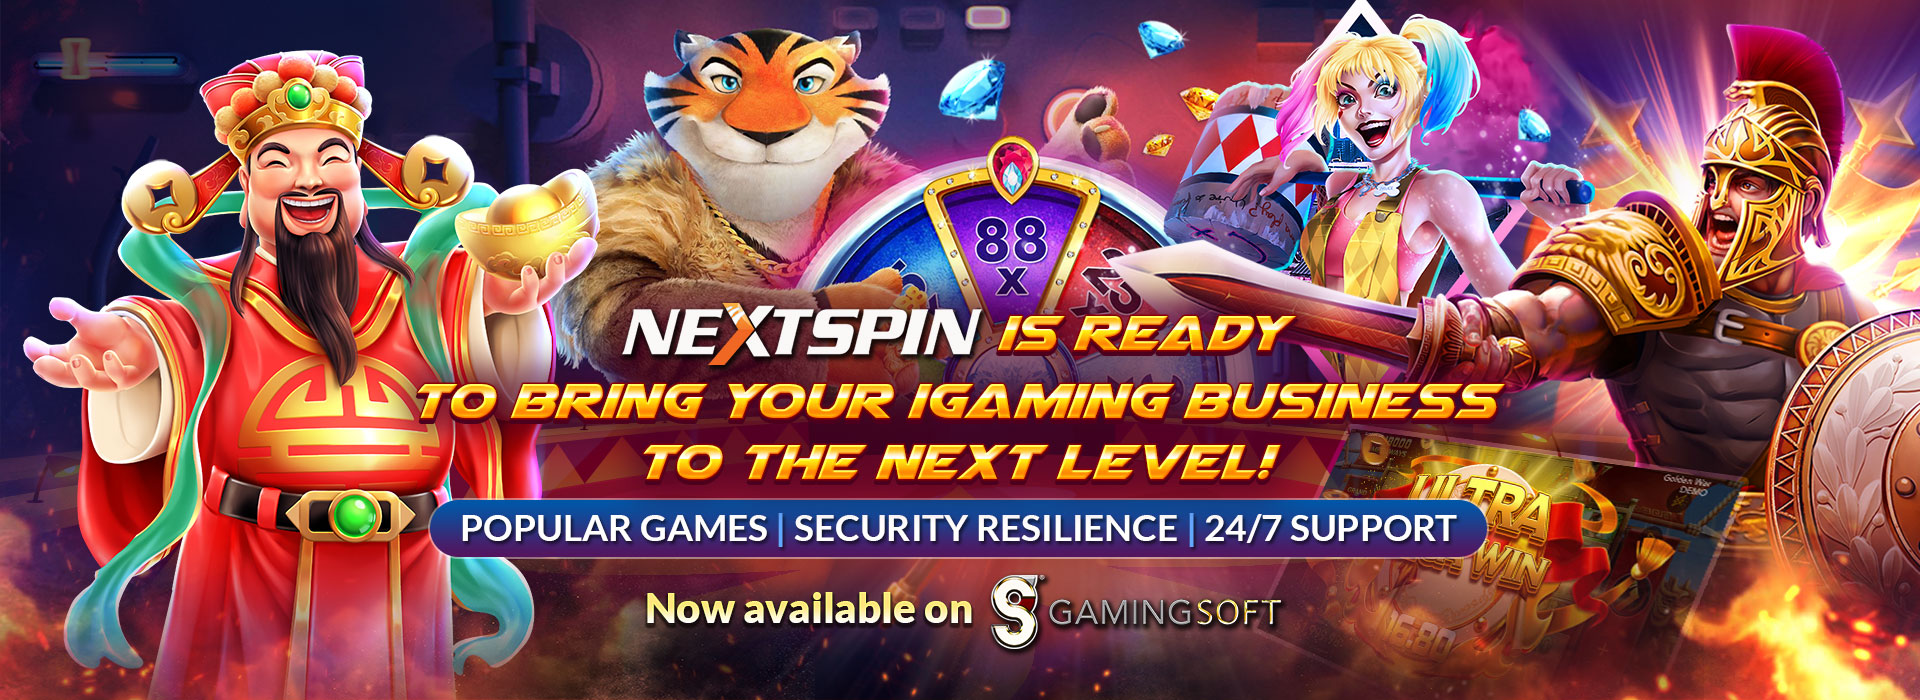 NEXTSPIN is ready to bring your igaming business to next level Web Banner - GamingSoft